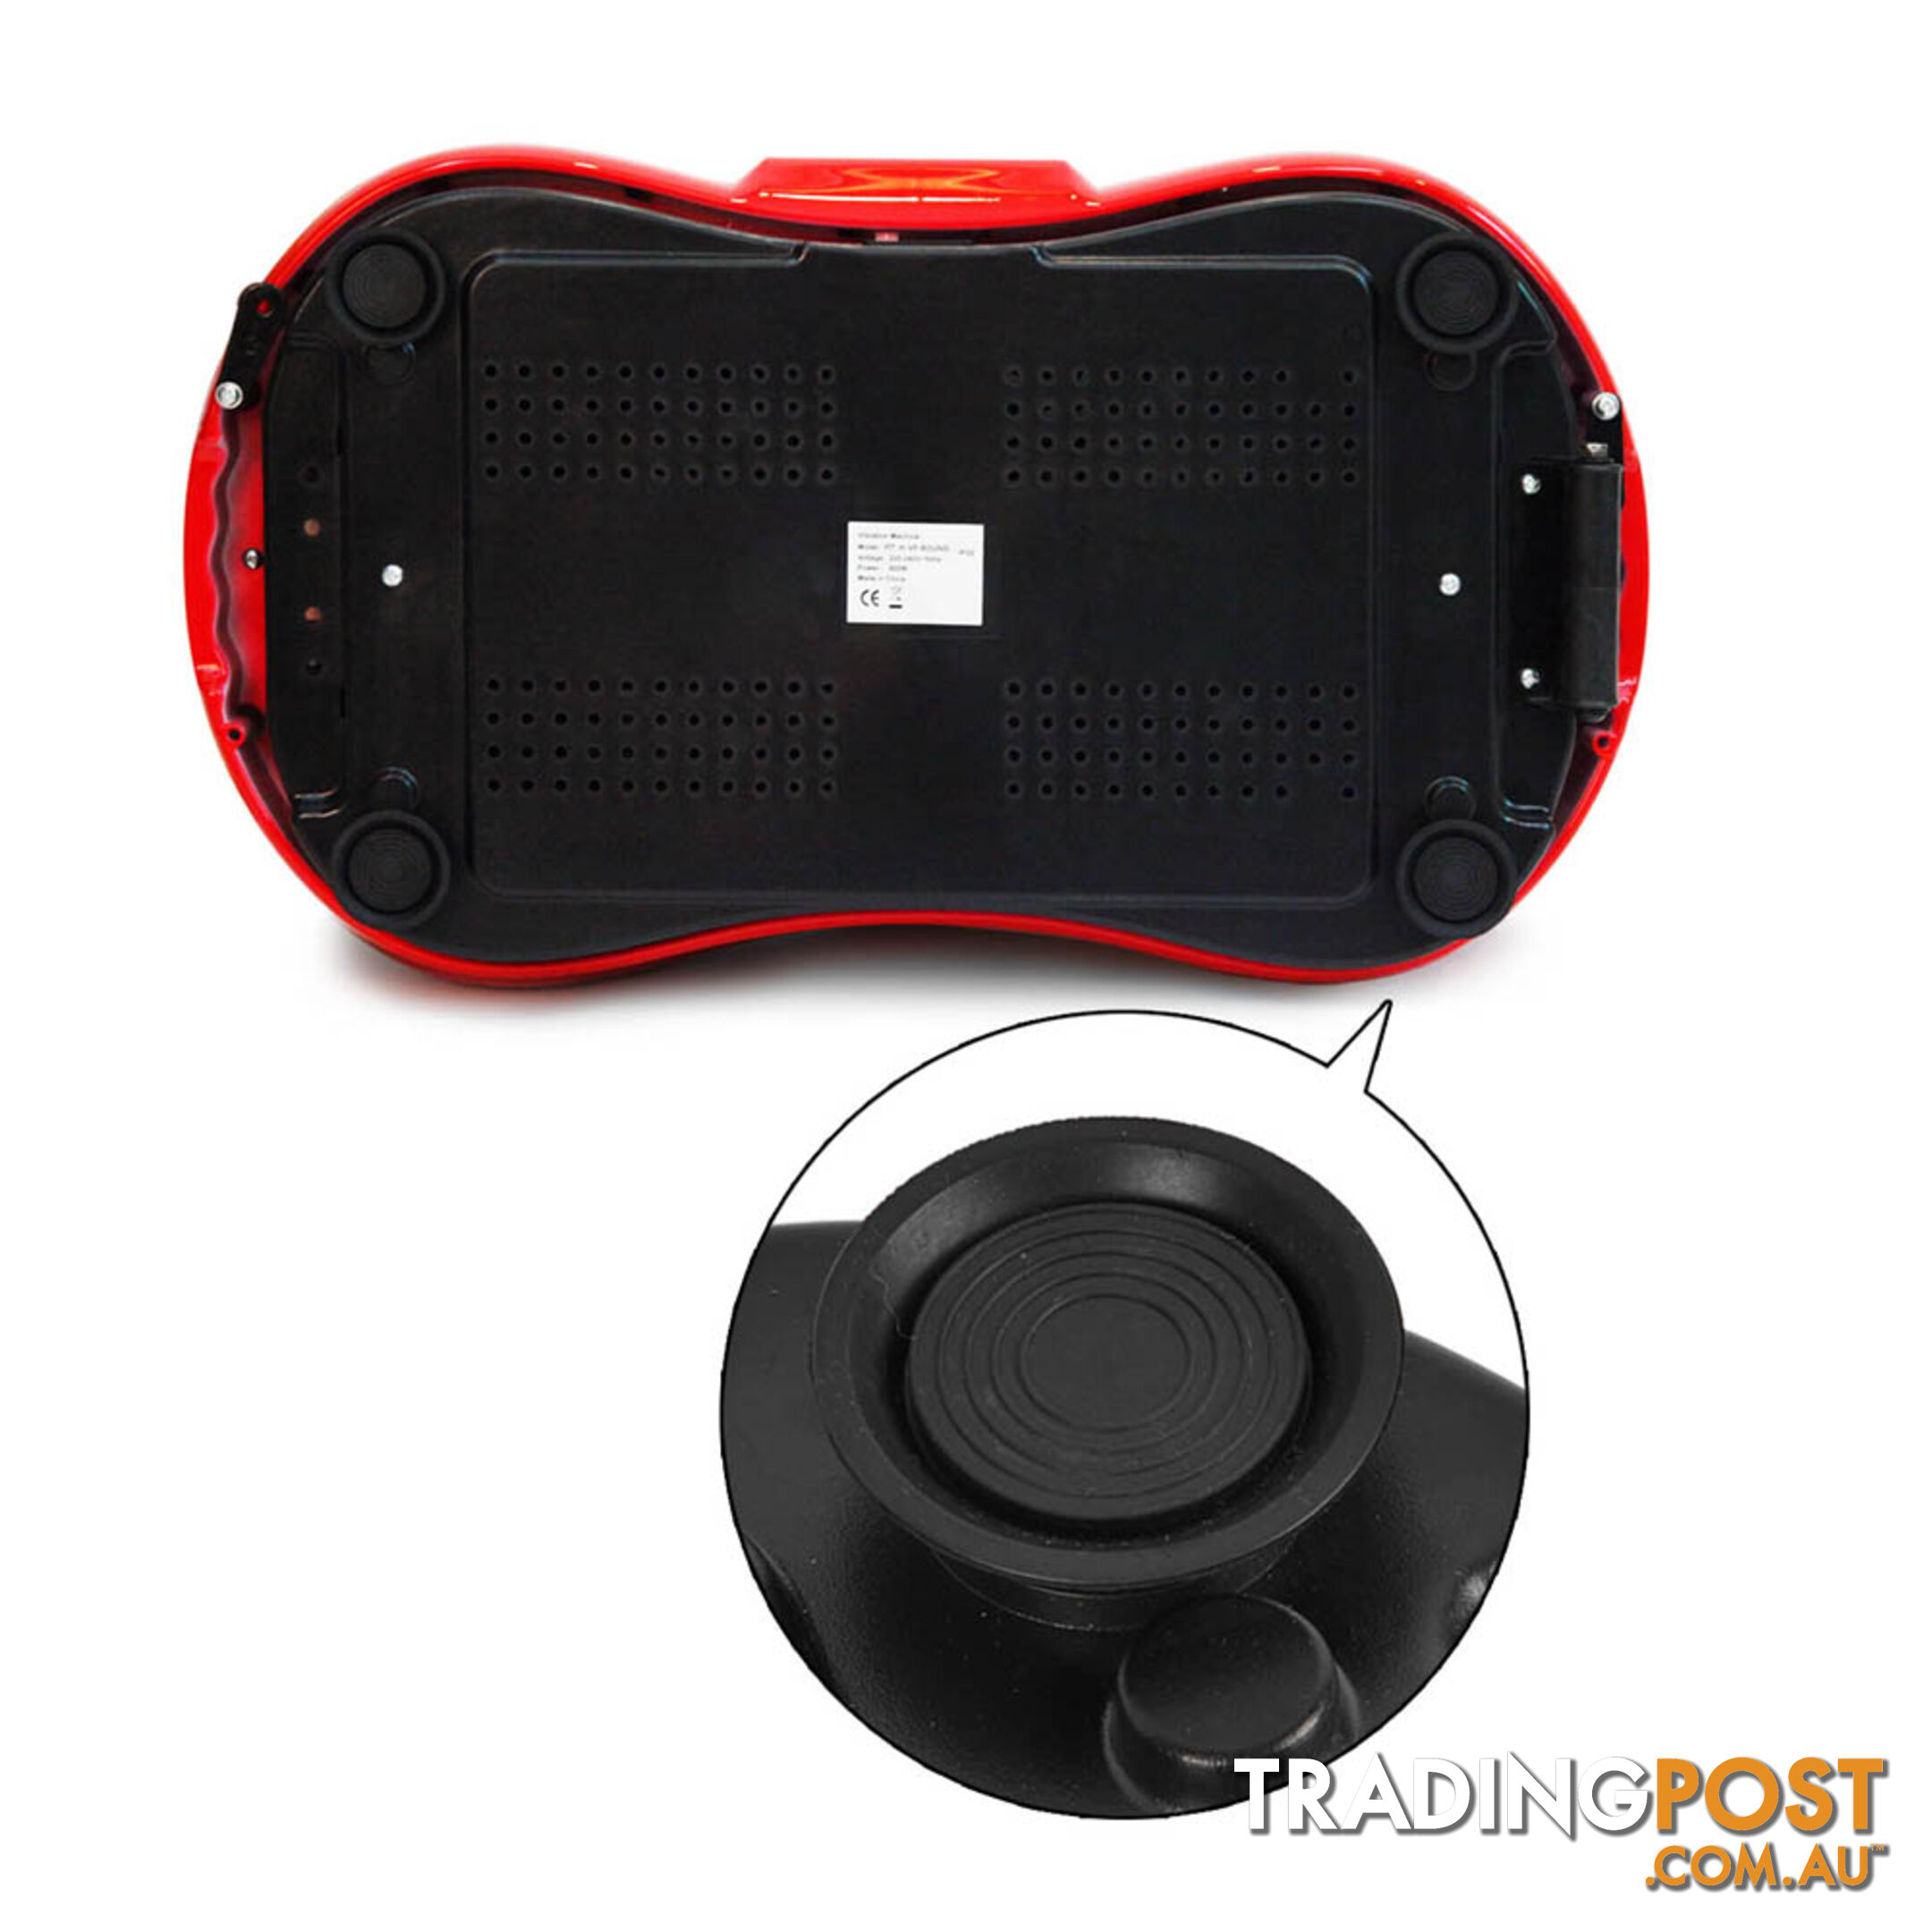 1000W Vibrating Plate with Roller Wheels - Red